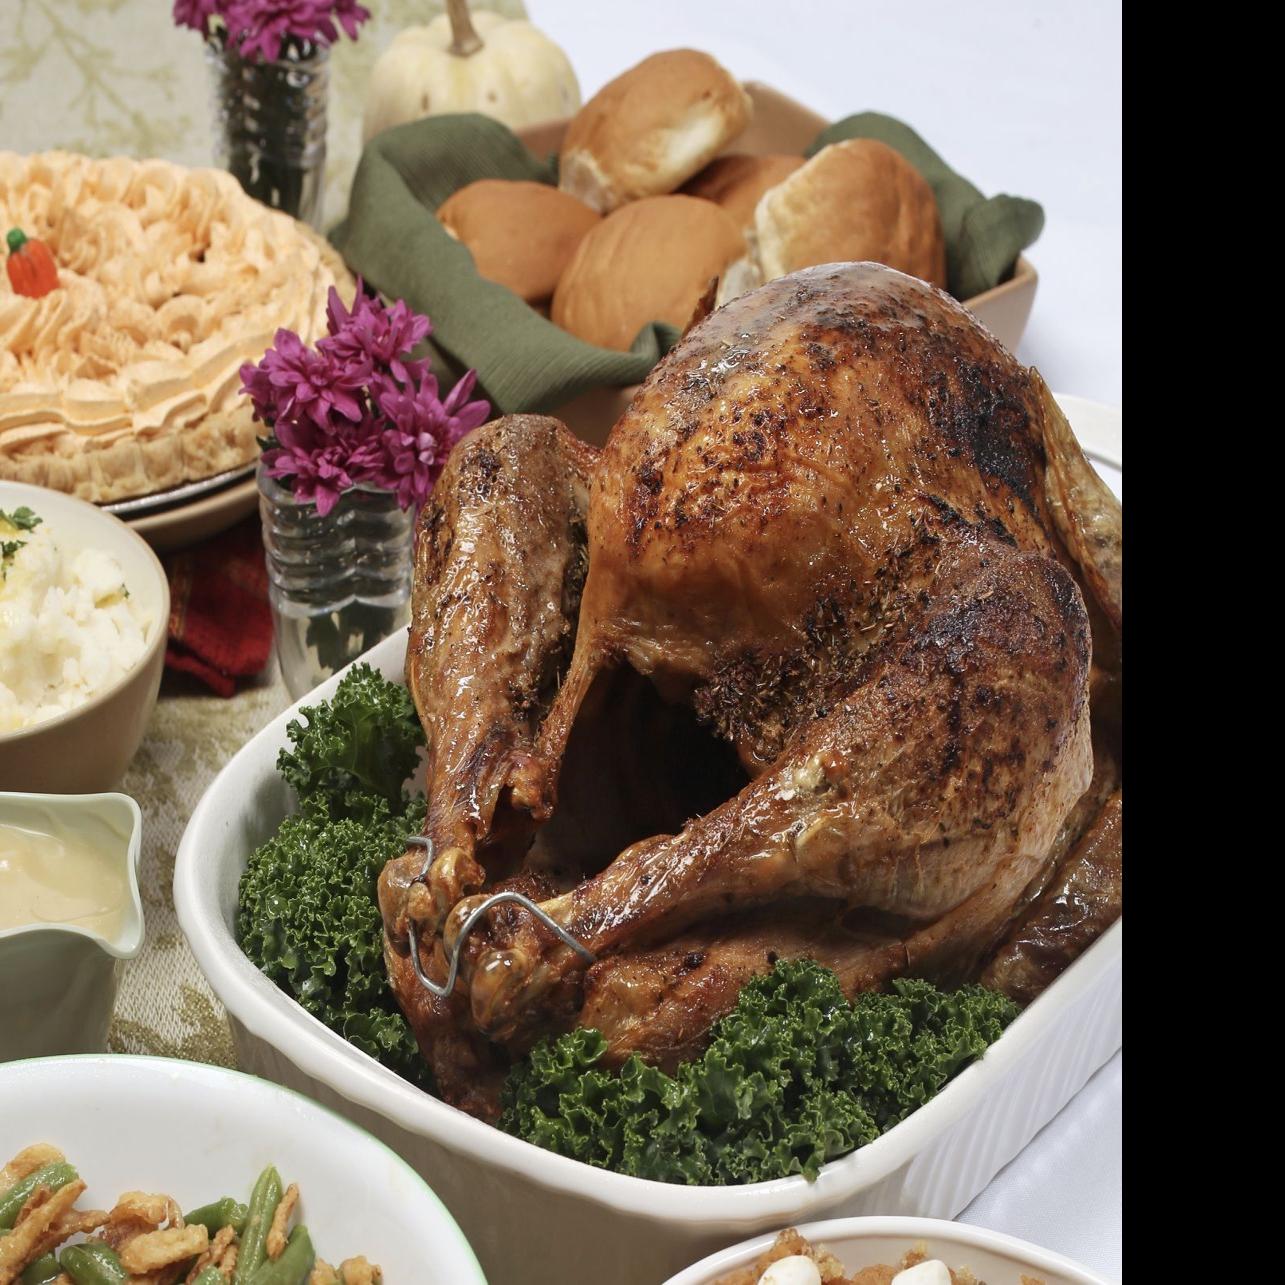 Thanksgiving To Go Here Are Some Local Options For Outsourcing The Holiday Meal Entertainment Madison Com